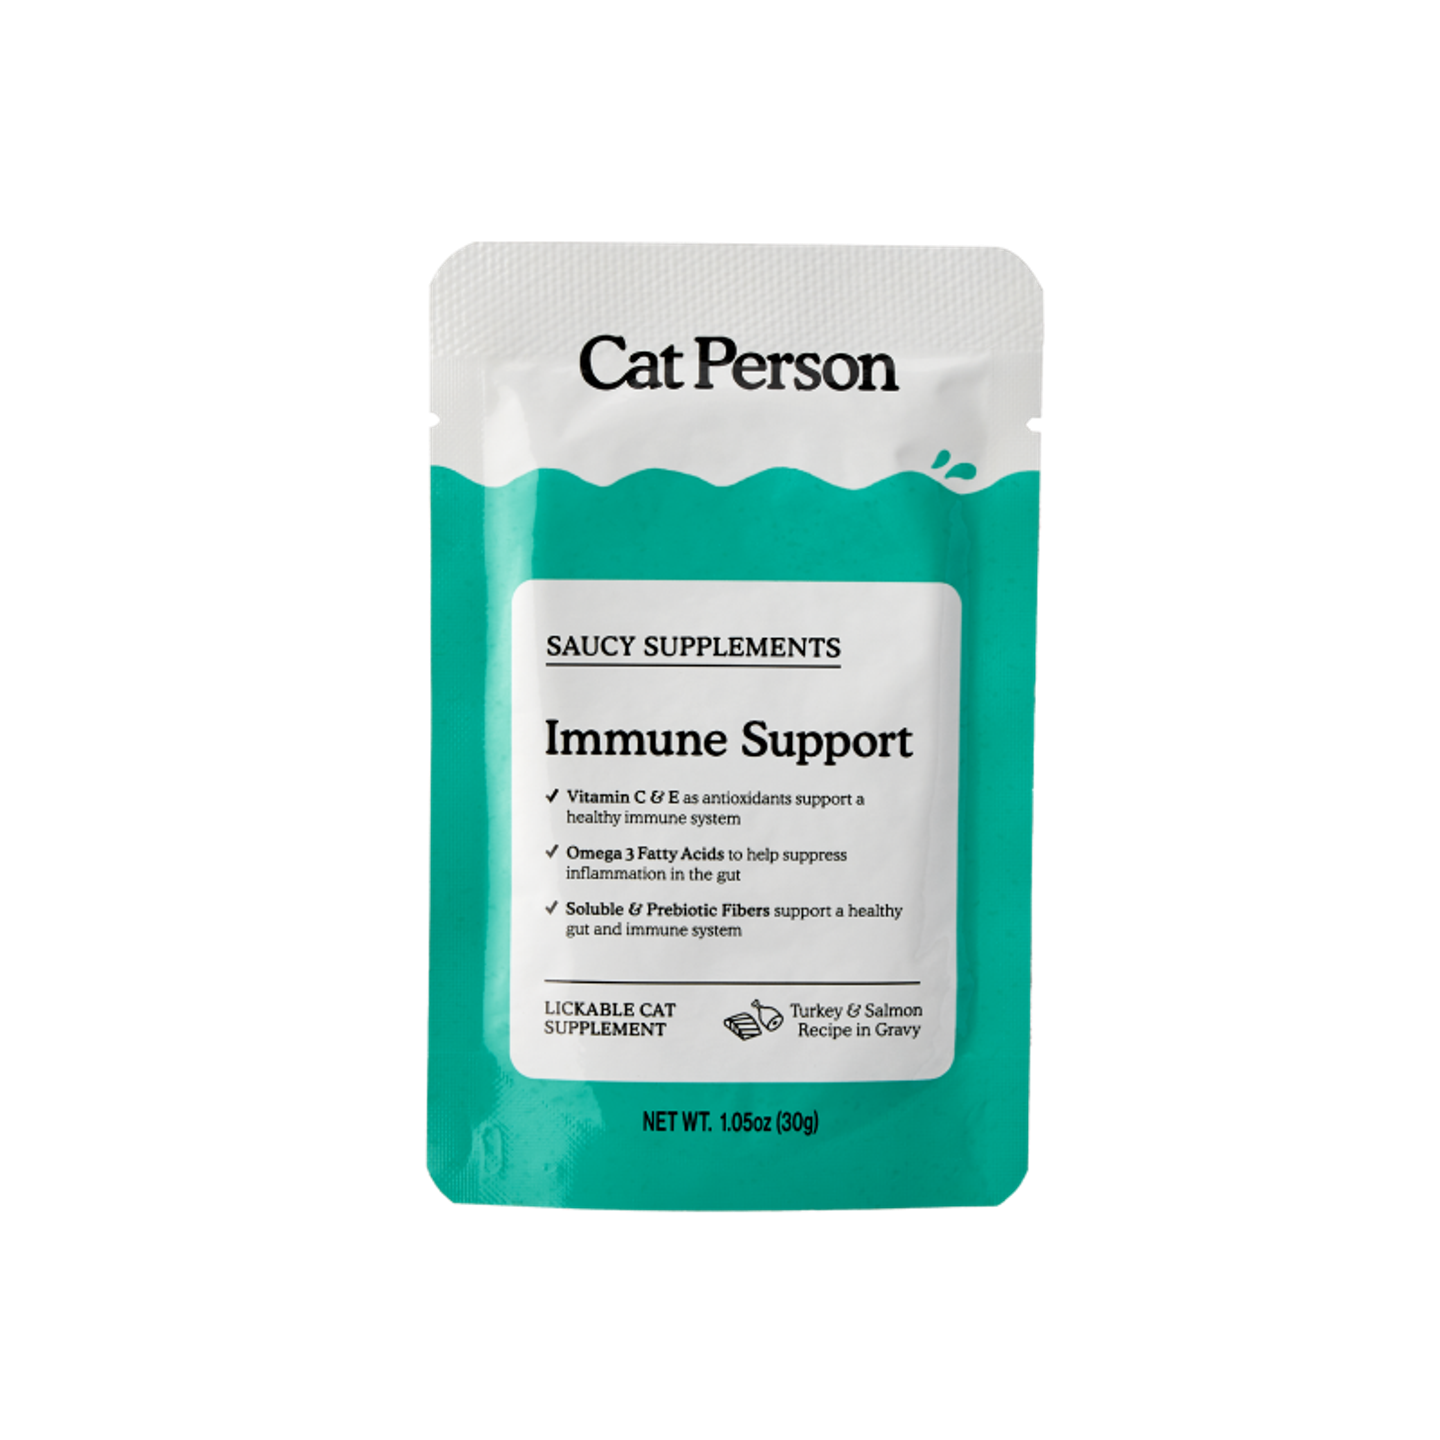 Pouch of Cat Person Immune Support Supplement